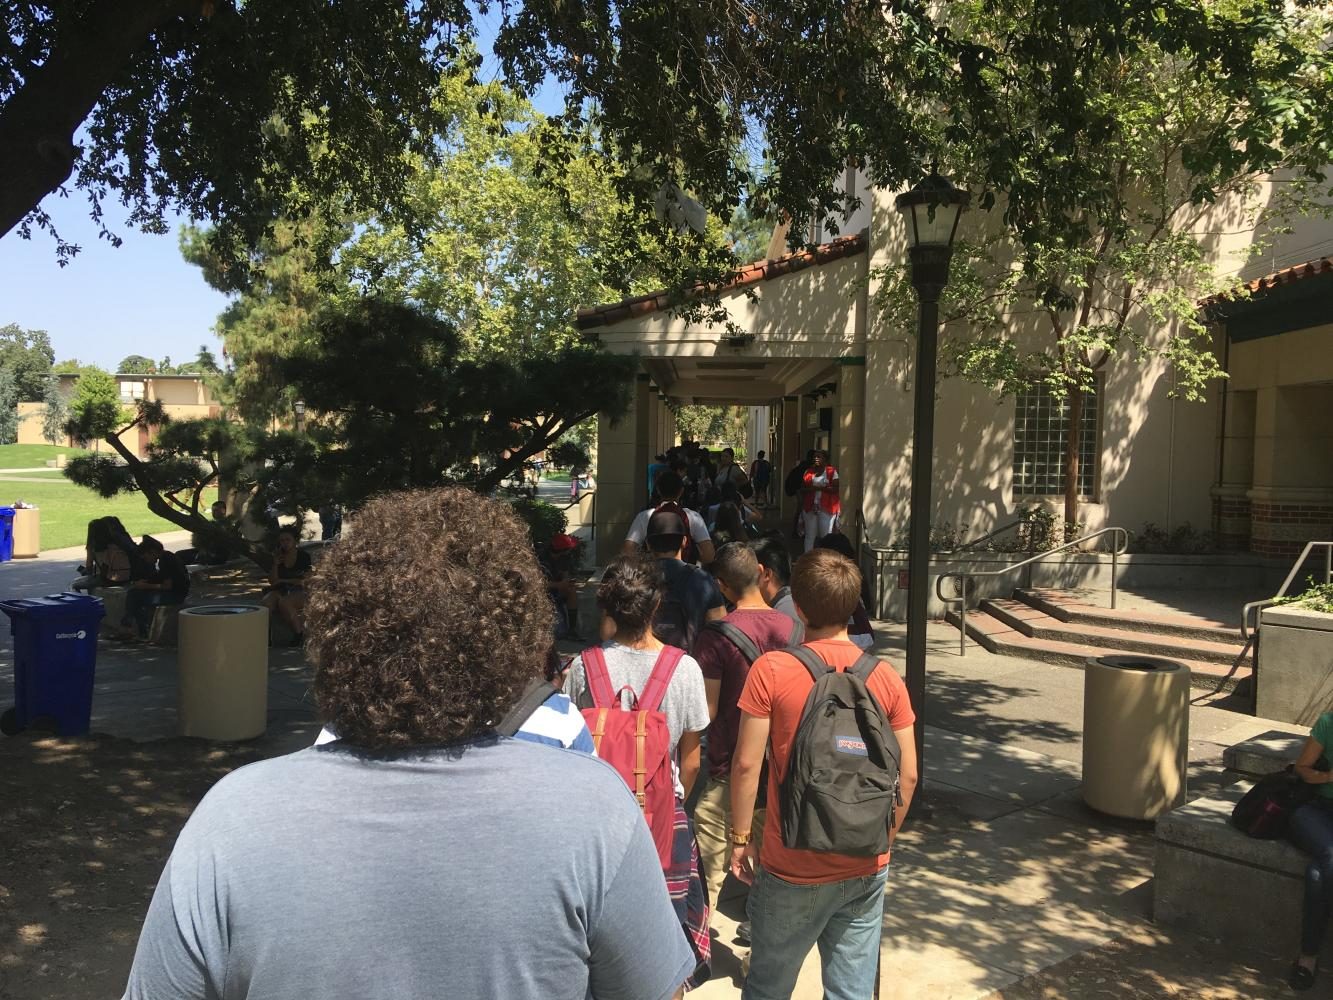 Fresno City College students wait in line to get in the bookstore on Tuesday, Aug. 15, 2017